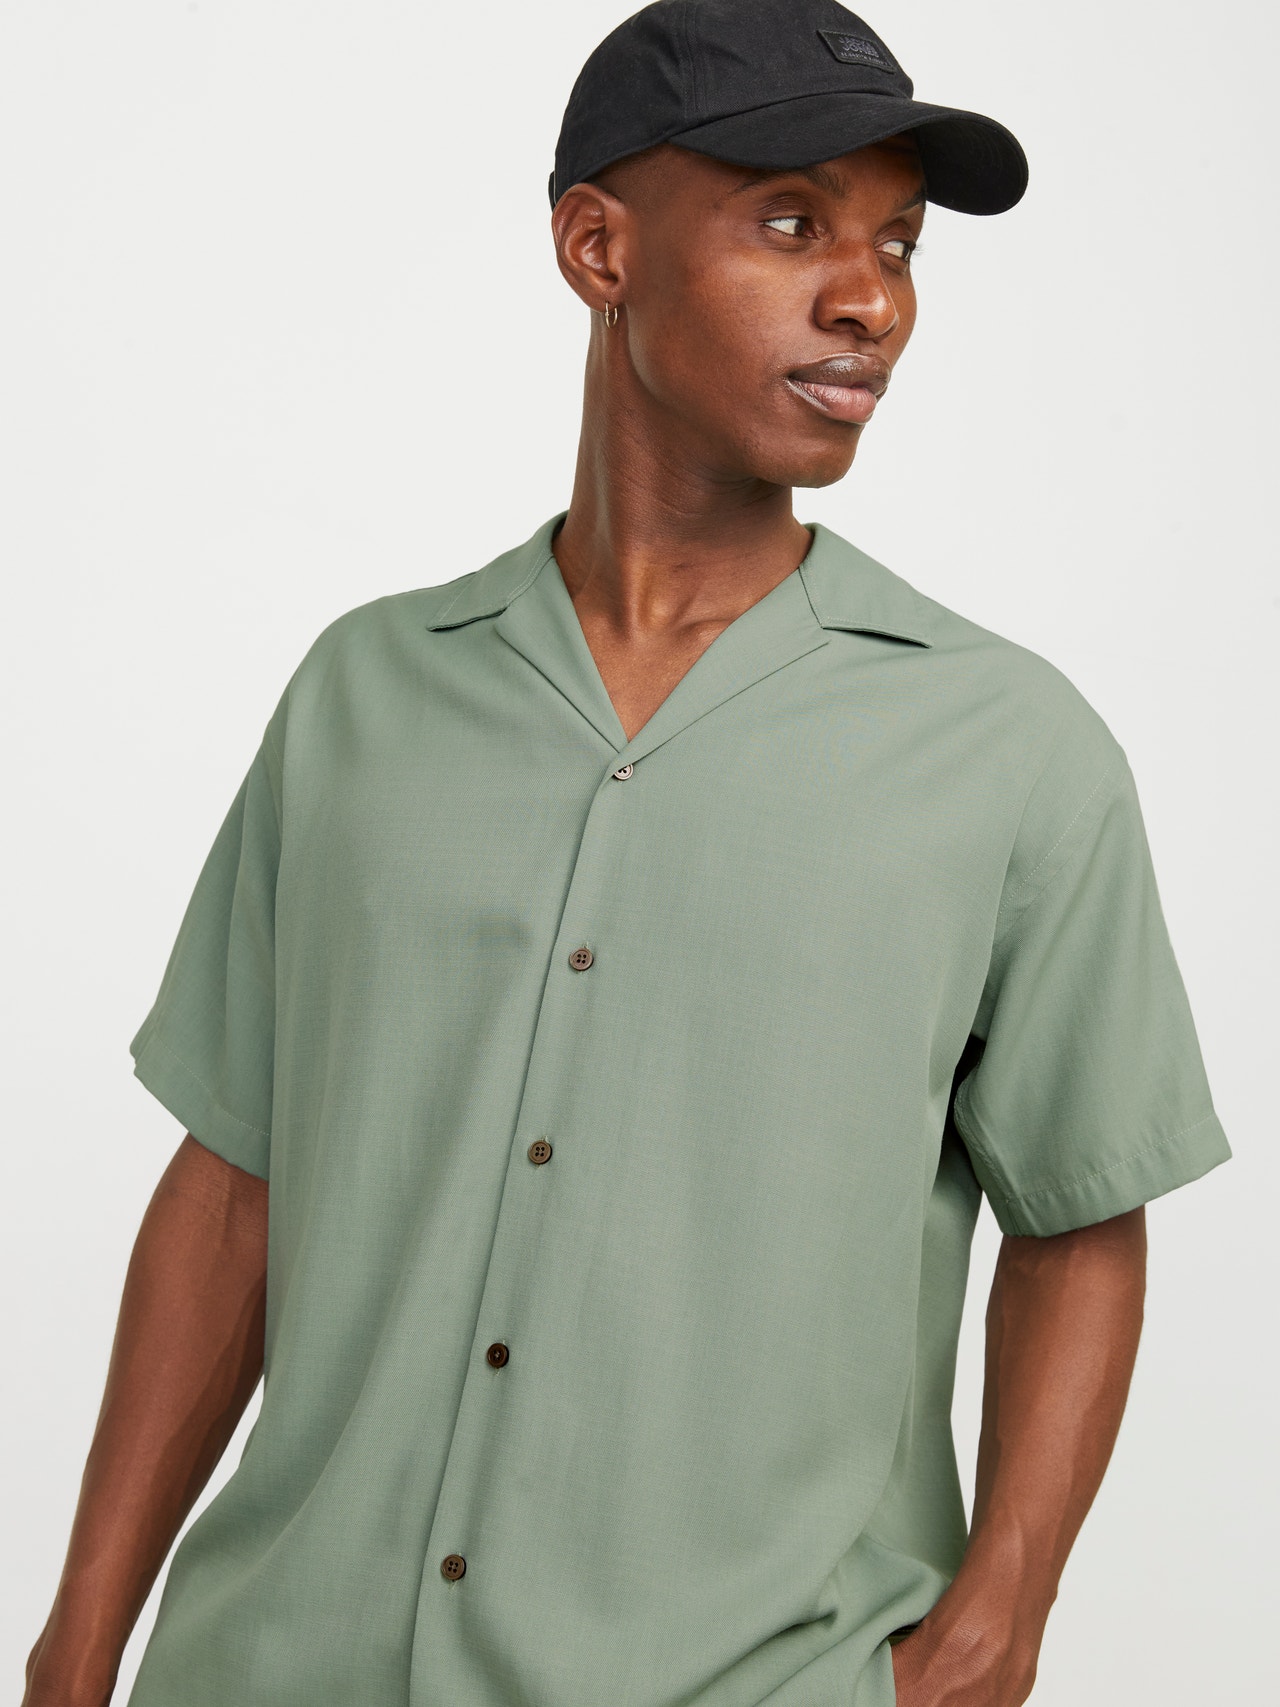 Jack & Jones Relaxed Fit Shirt -Lily Pad - 12251027